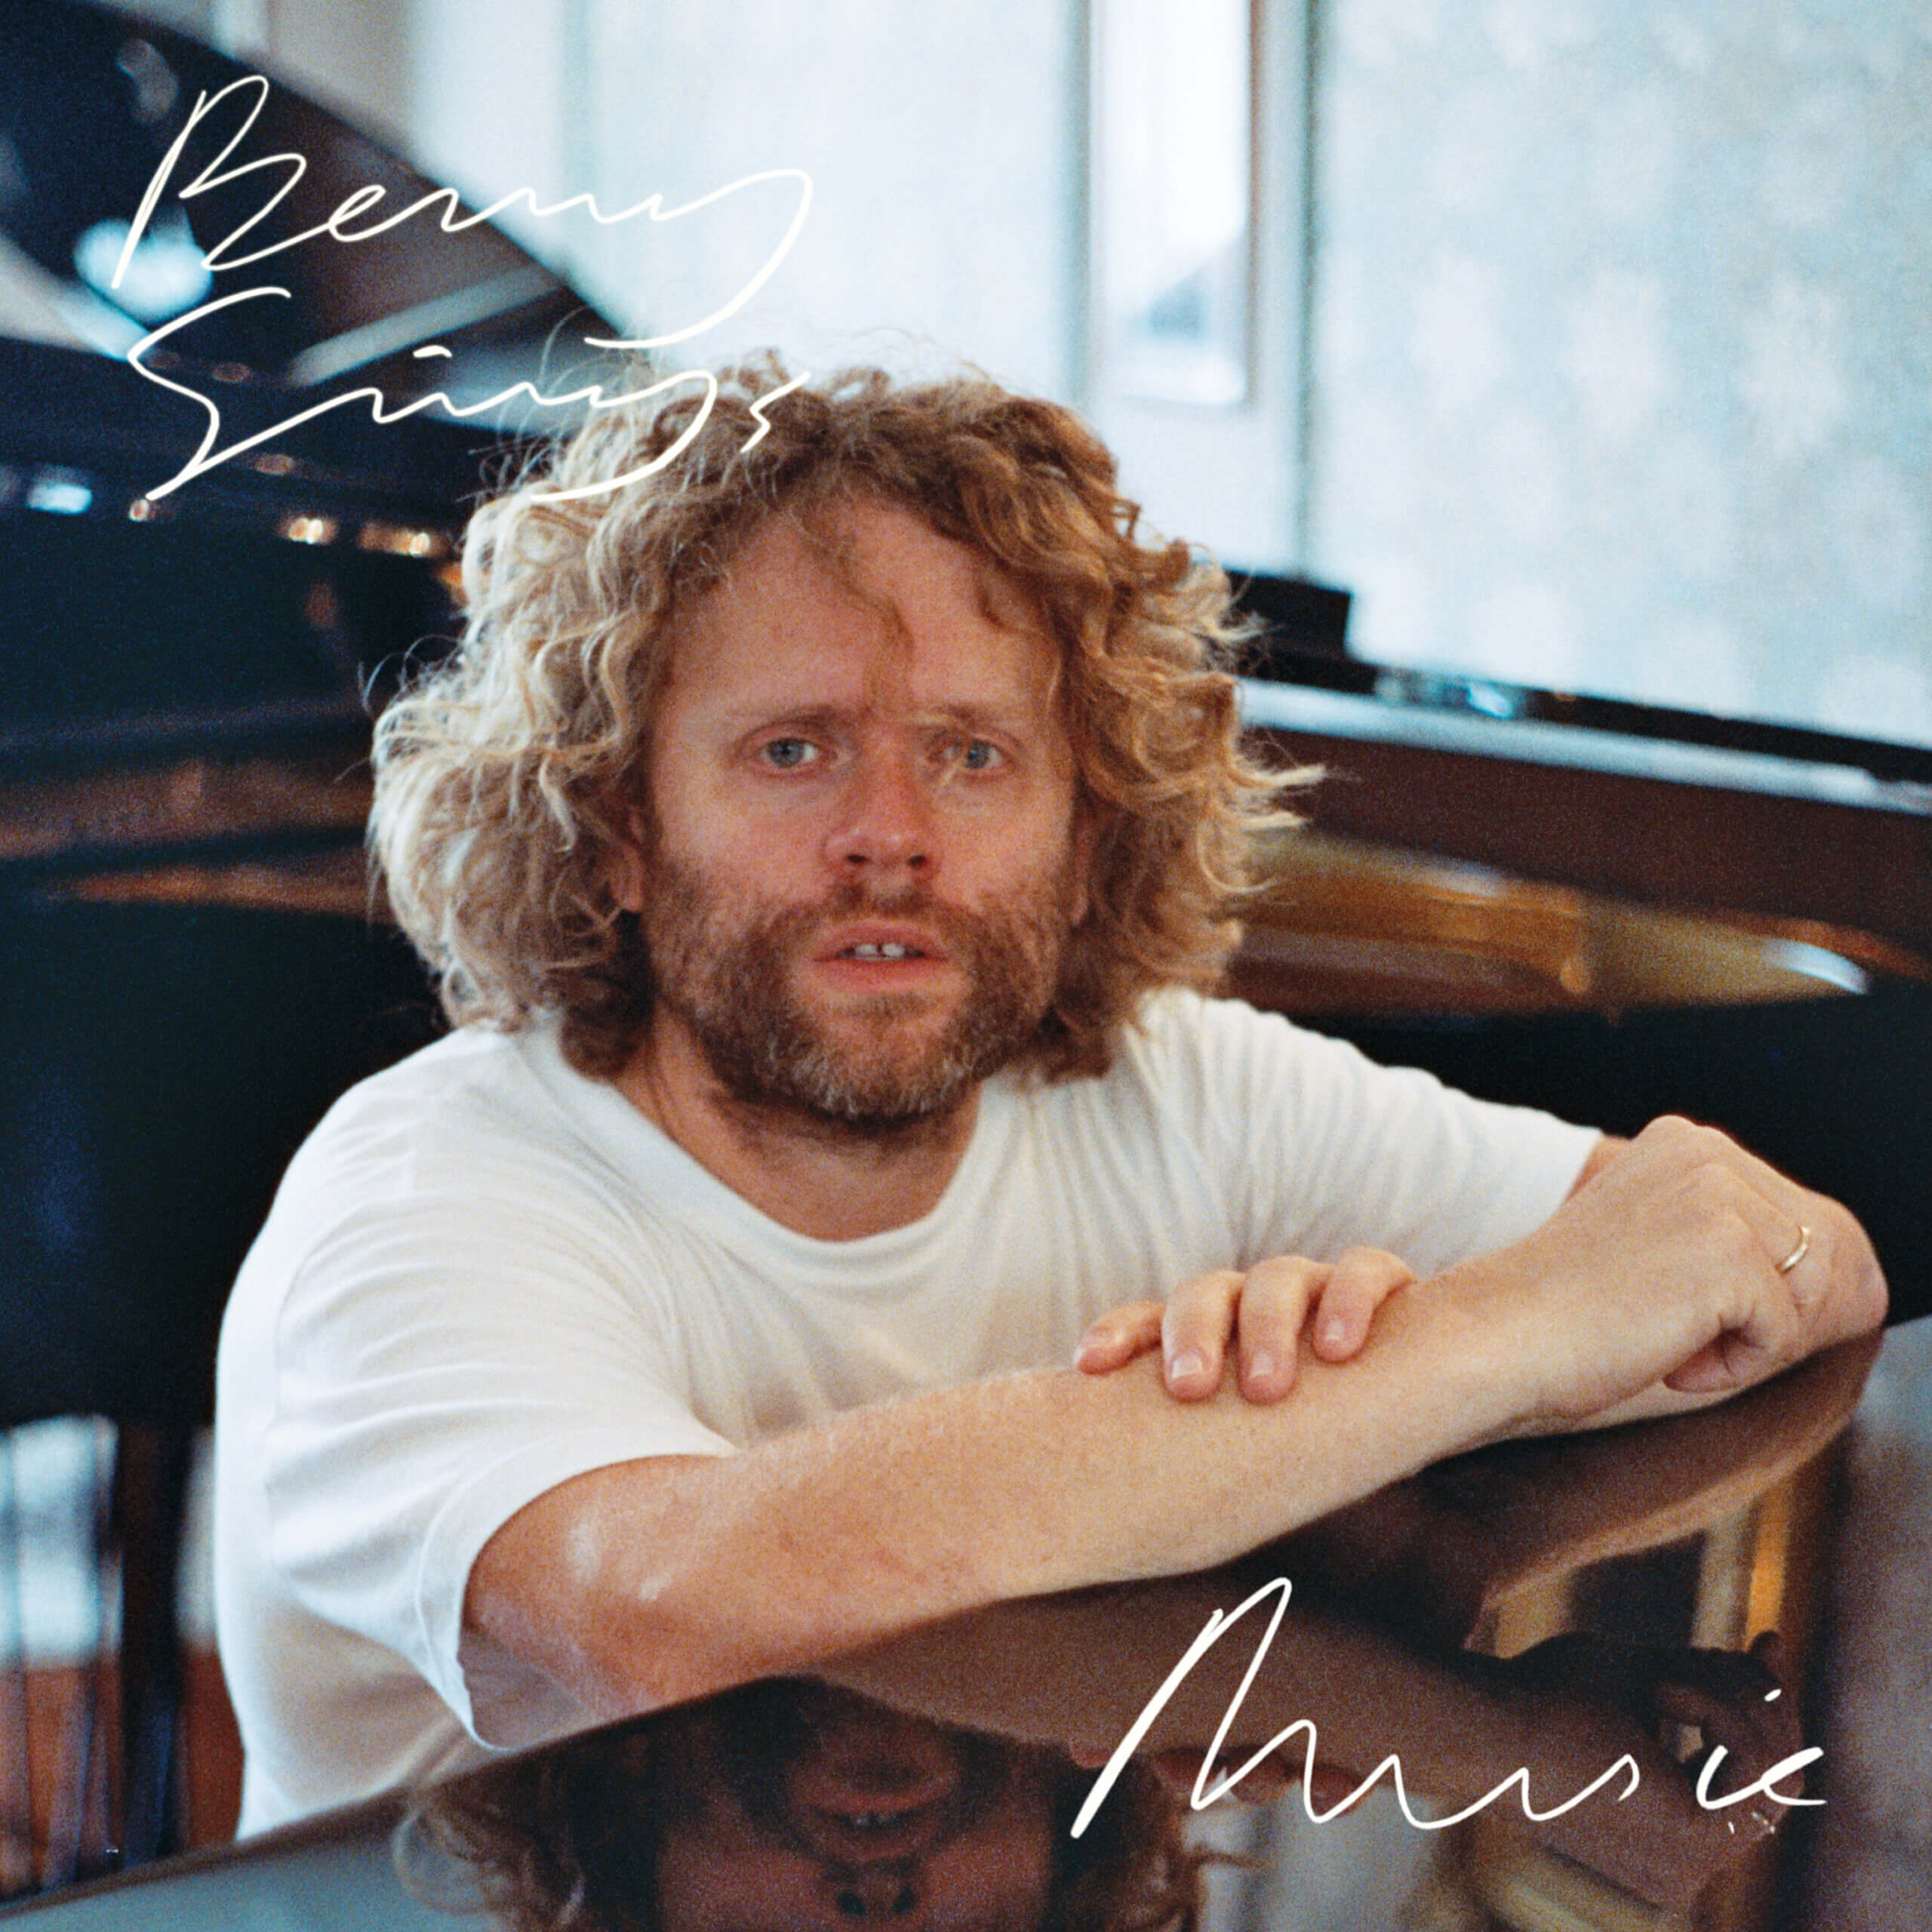 Music by Benny Sings album review by Adam Fink. The Dutch singer/songwriter's full-length comes out on April 9, 2021 via Stones Throw Records